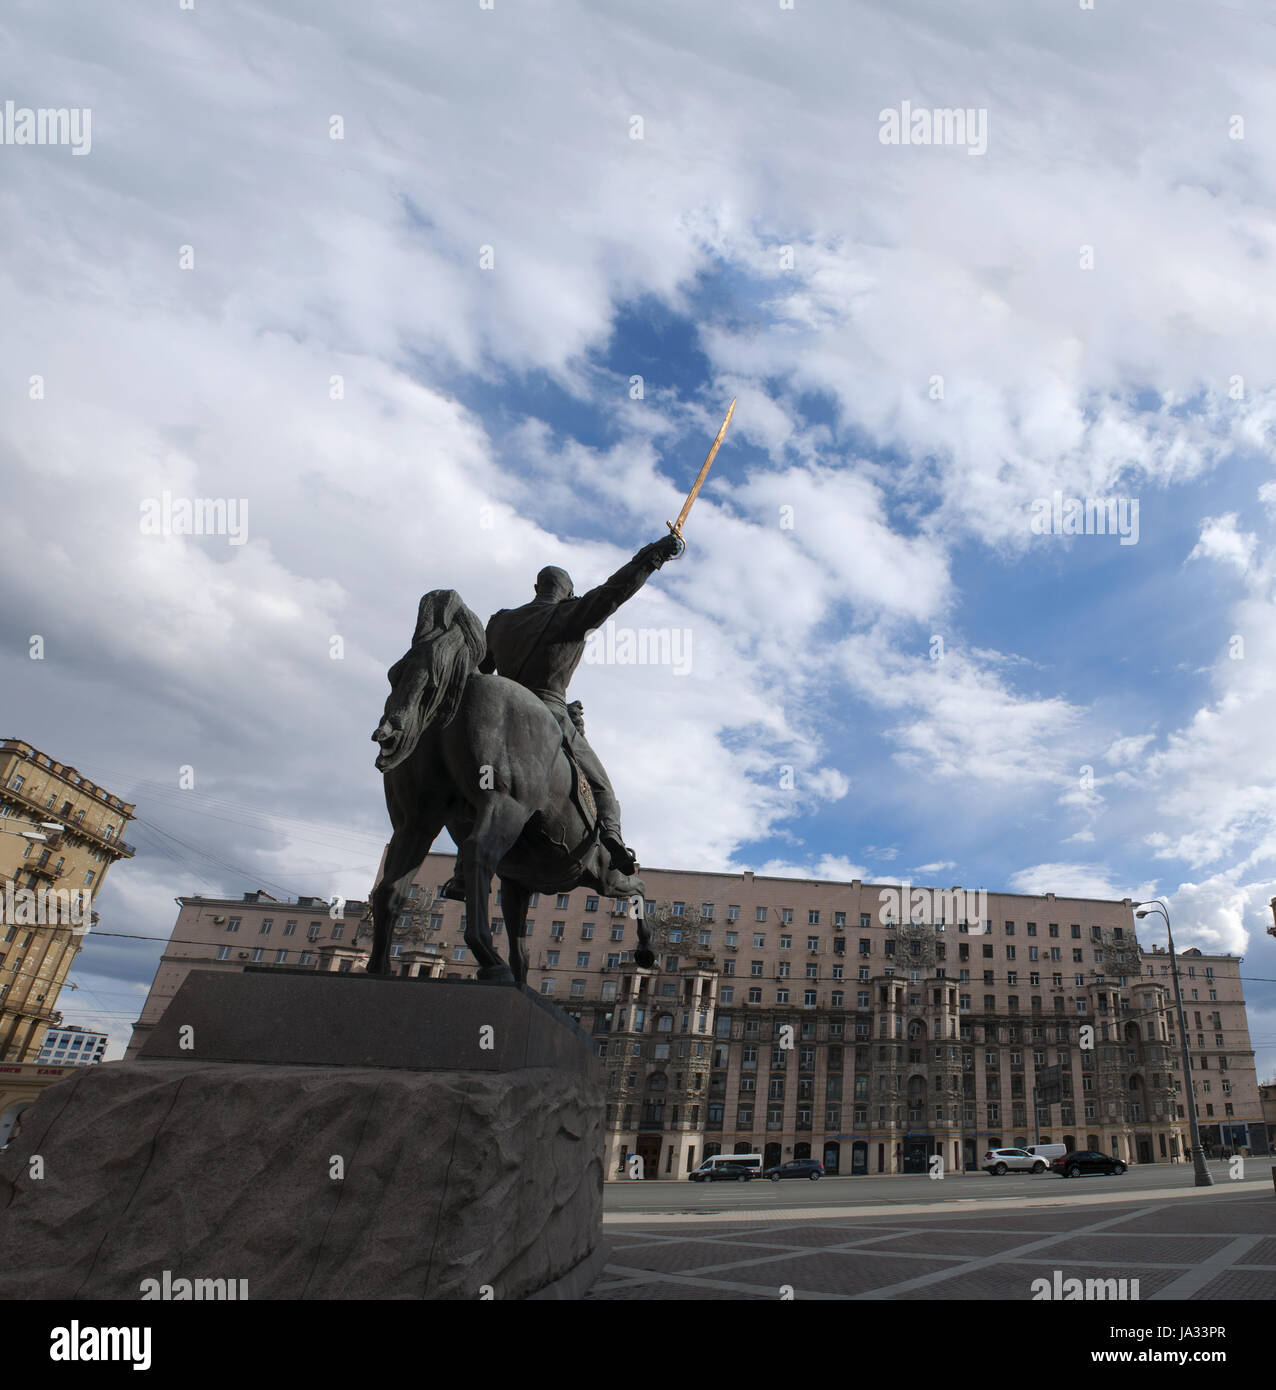 the skyline of Moscow and the monument to Commander Bagration, prince of Georgian extraction and hero of Russian Patriotic War, in a public garden Stock Photo